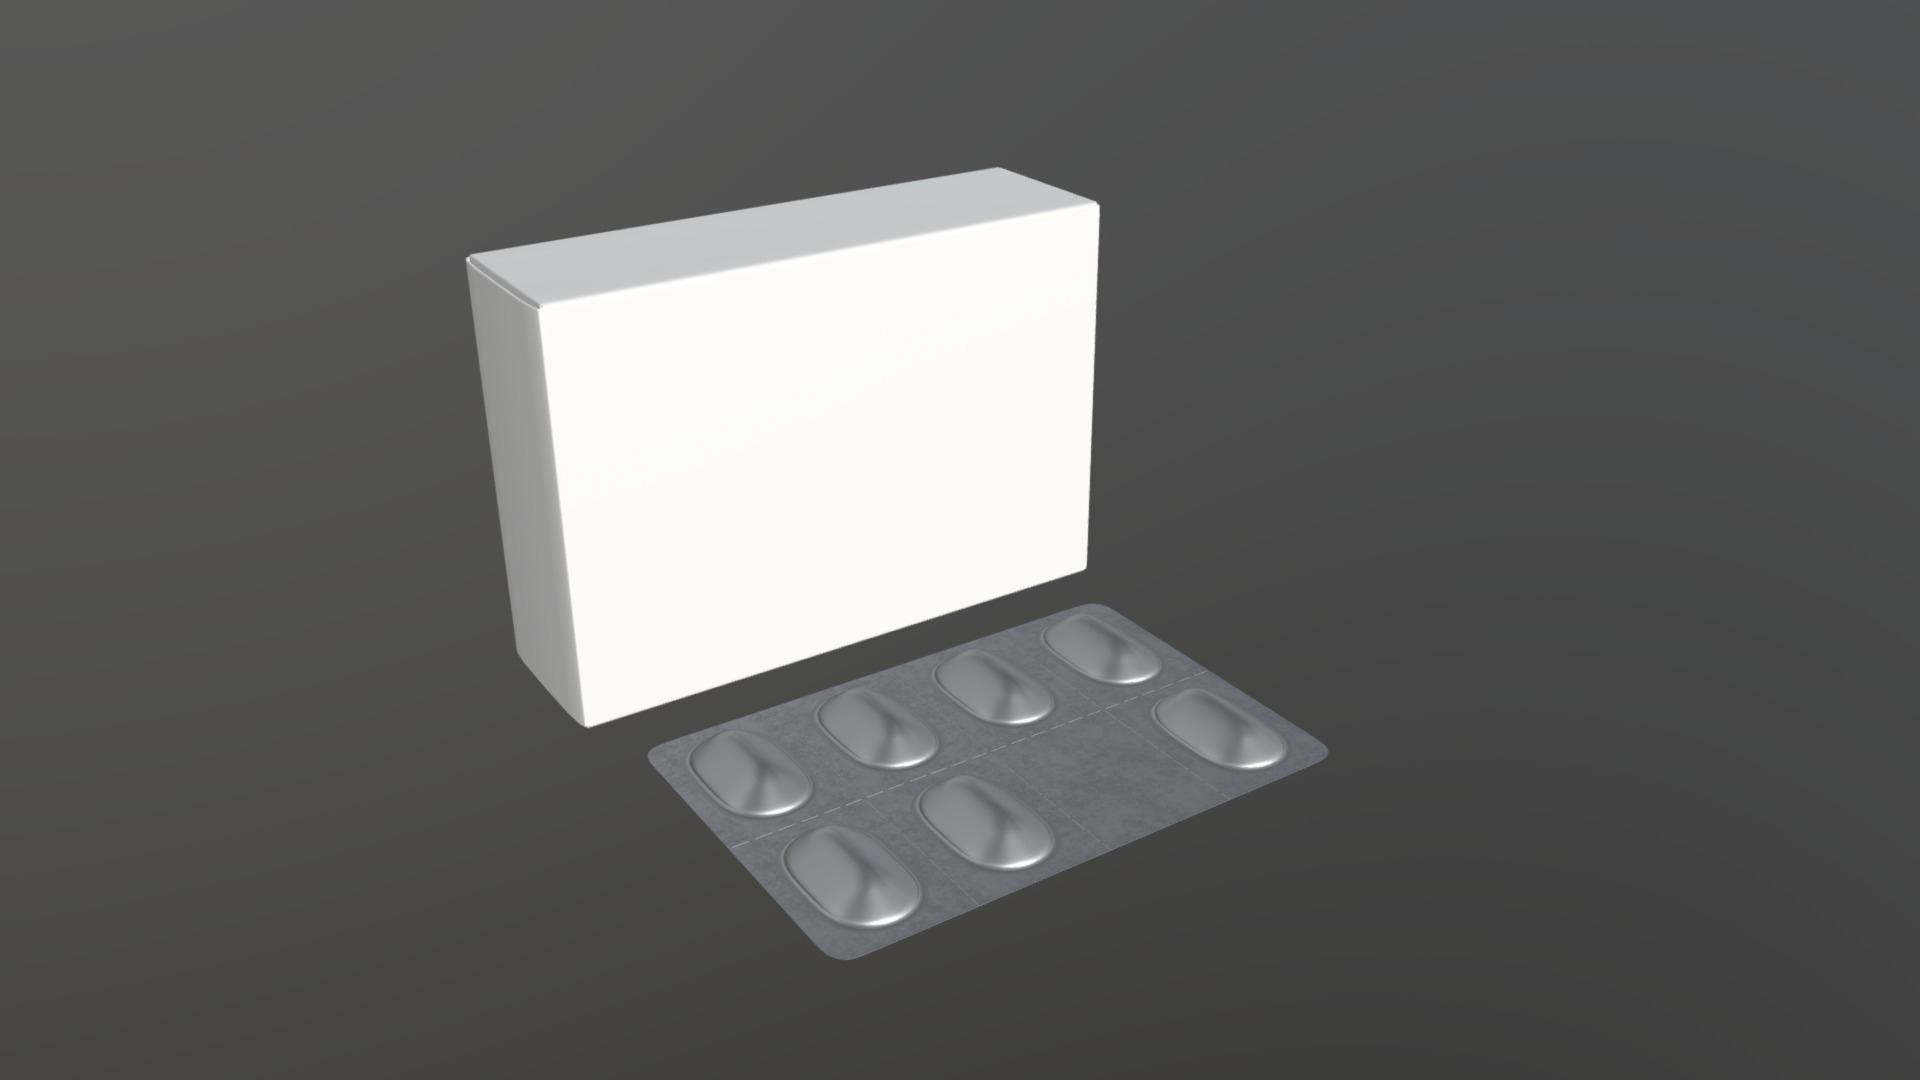 3D model Pills in blister with box - This is a 3D model of the Pills in blister with box. The 3D model is about a white rectangular object with buttons and a silver circle on a grey surface.